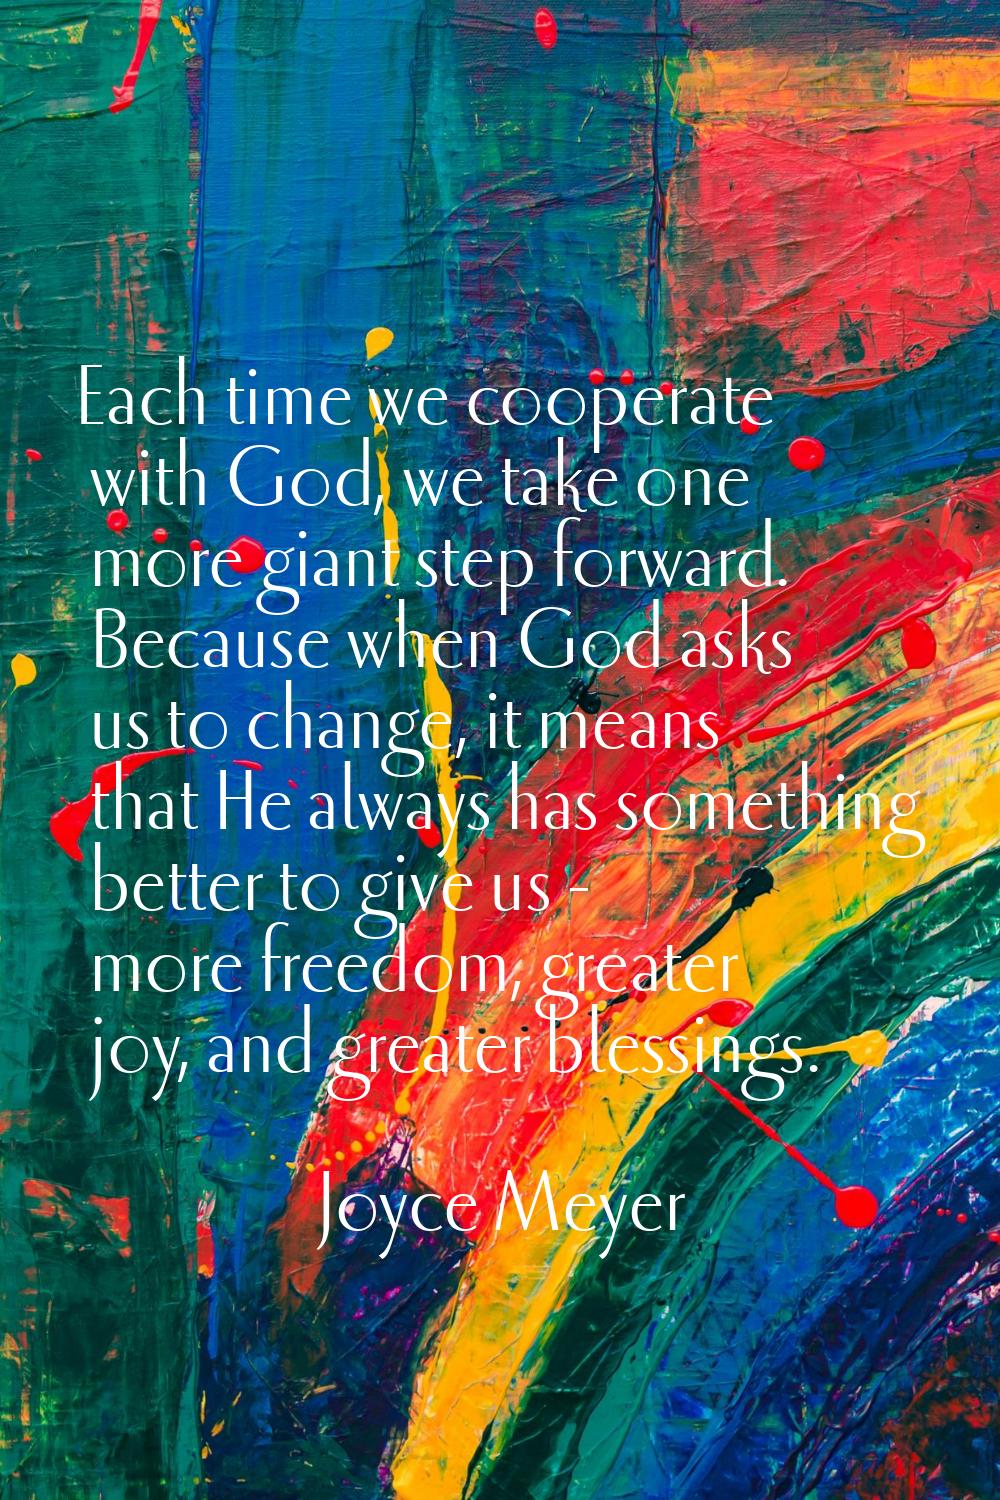 Each time we cooperate with God, we take one more giant step forward. Because when God asks us to c